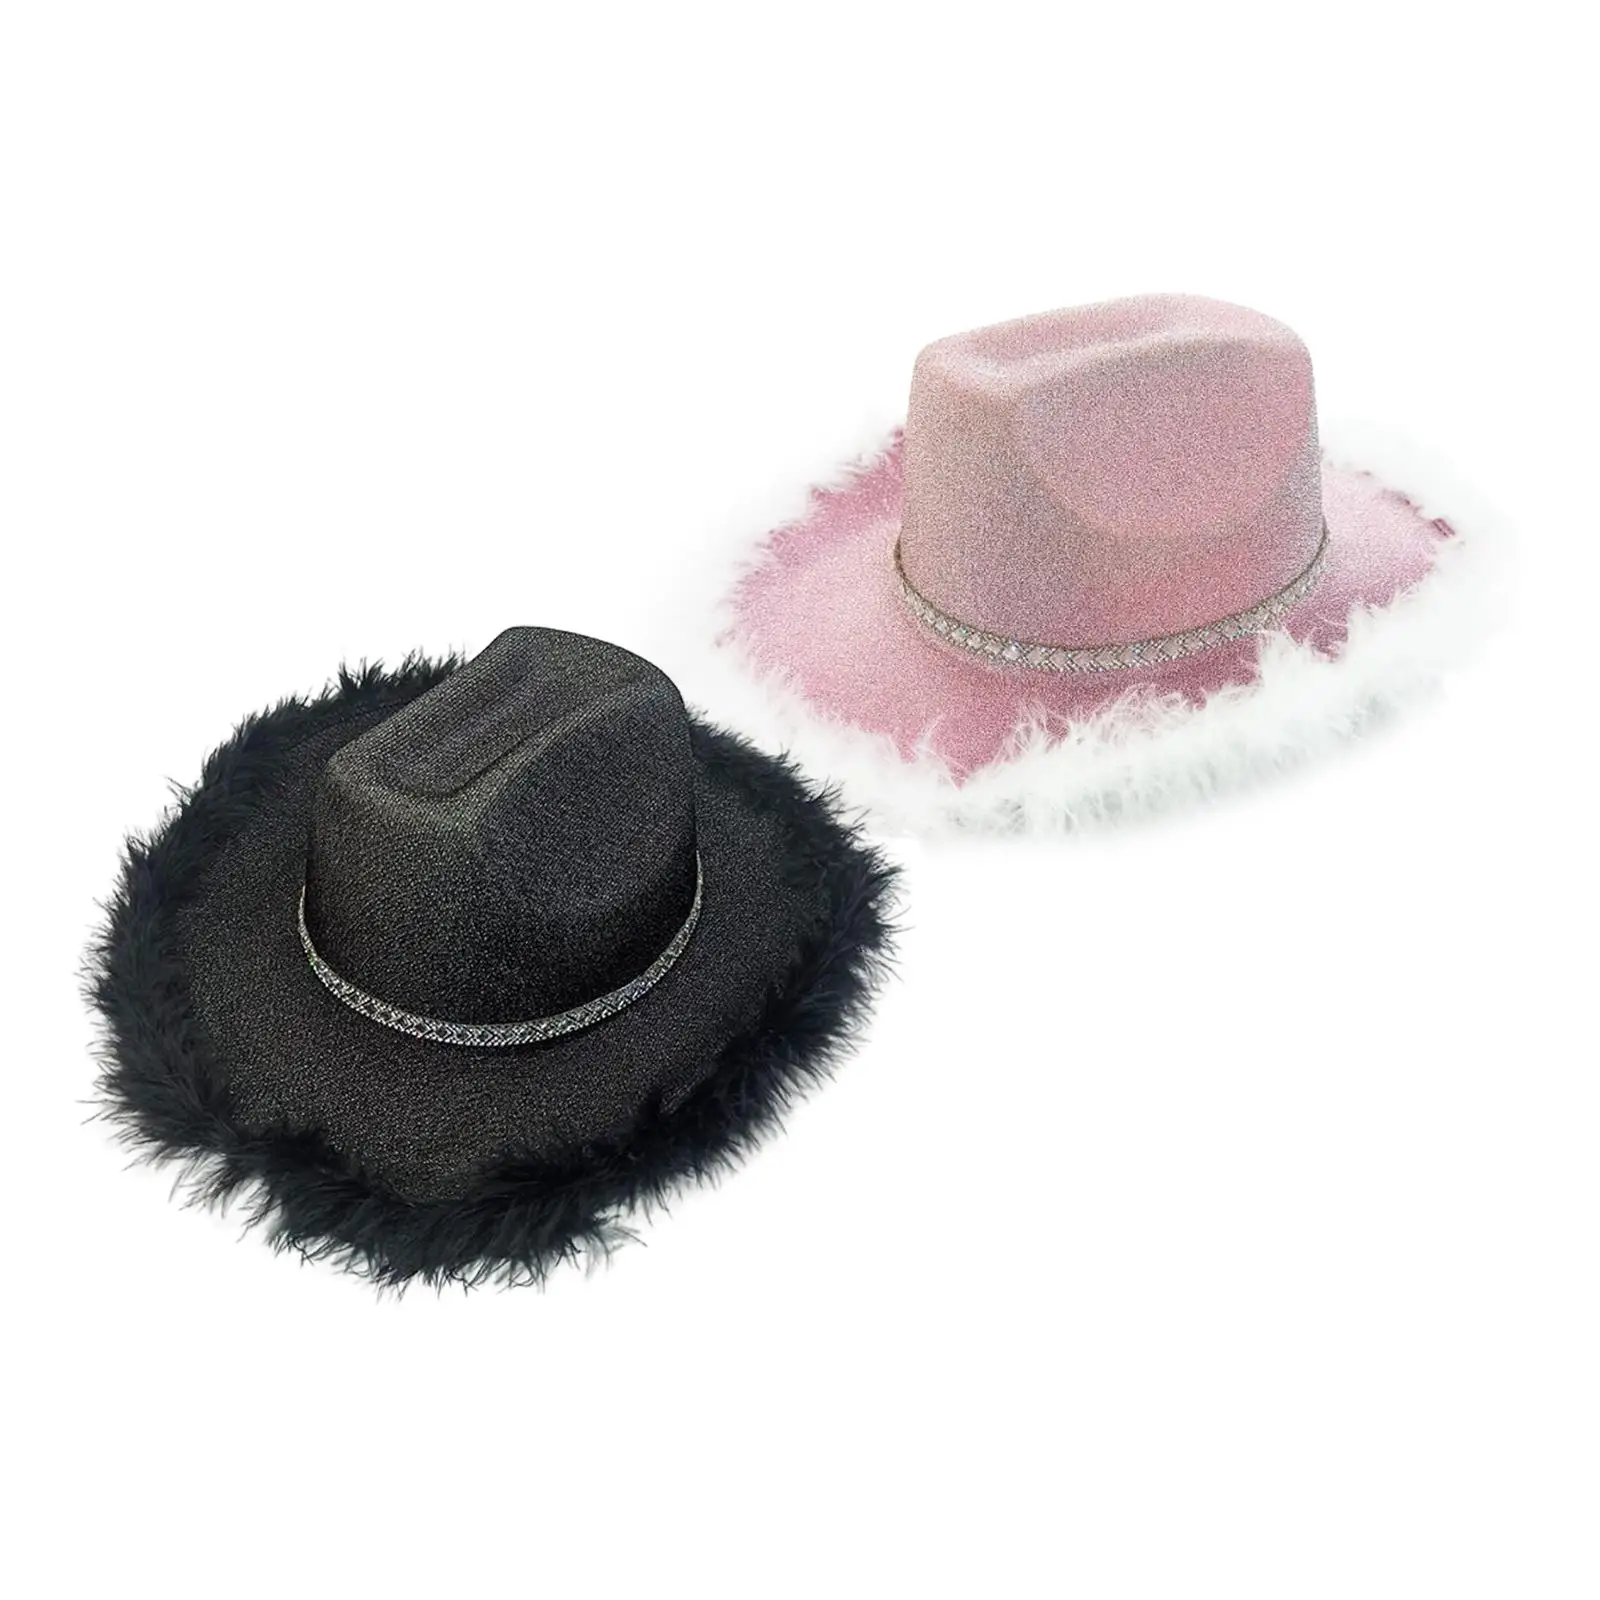 Western Theme Cowboy Hat Cowgirl Hat with Artificial Feather for Unisex